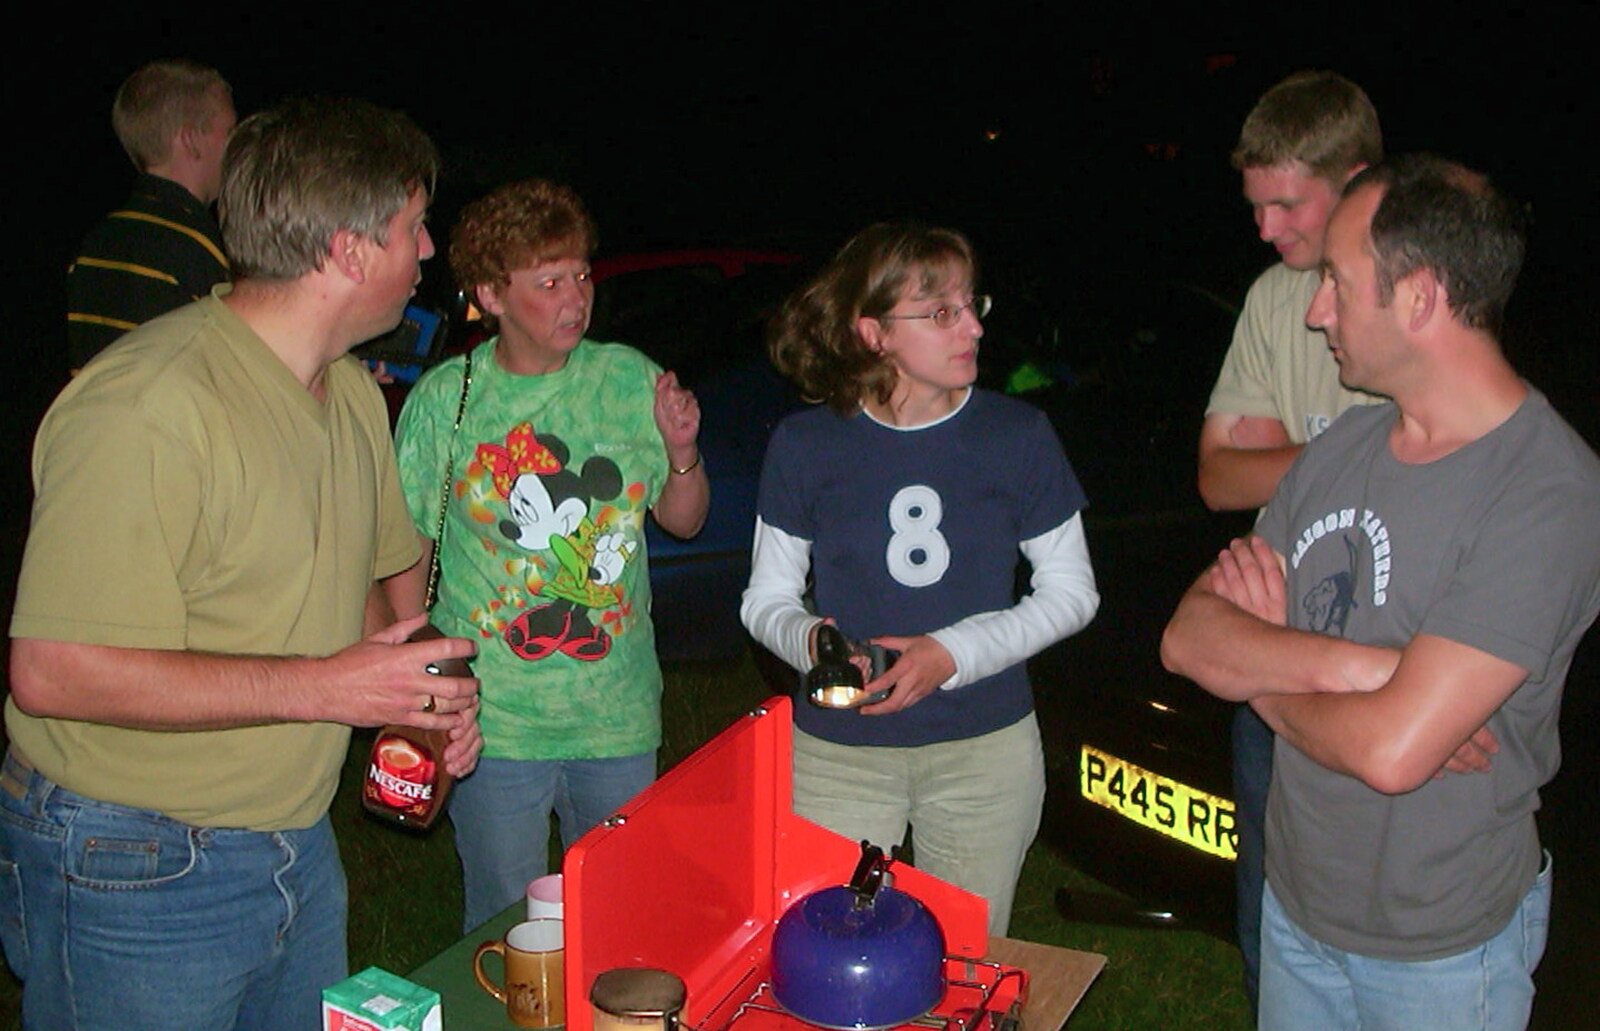 A BSCC Splinter Group Camping Weekend, Theberton, Suffolk - 11th August 2002: Everyone hangs around by the kettle